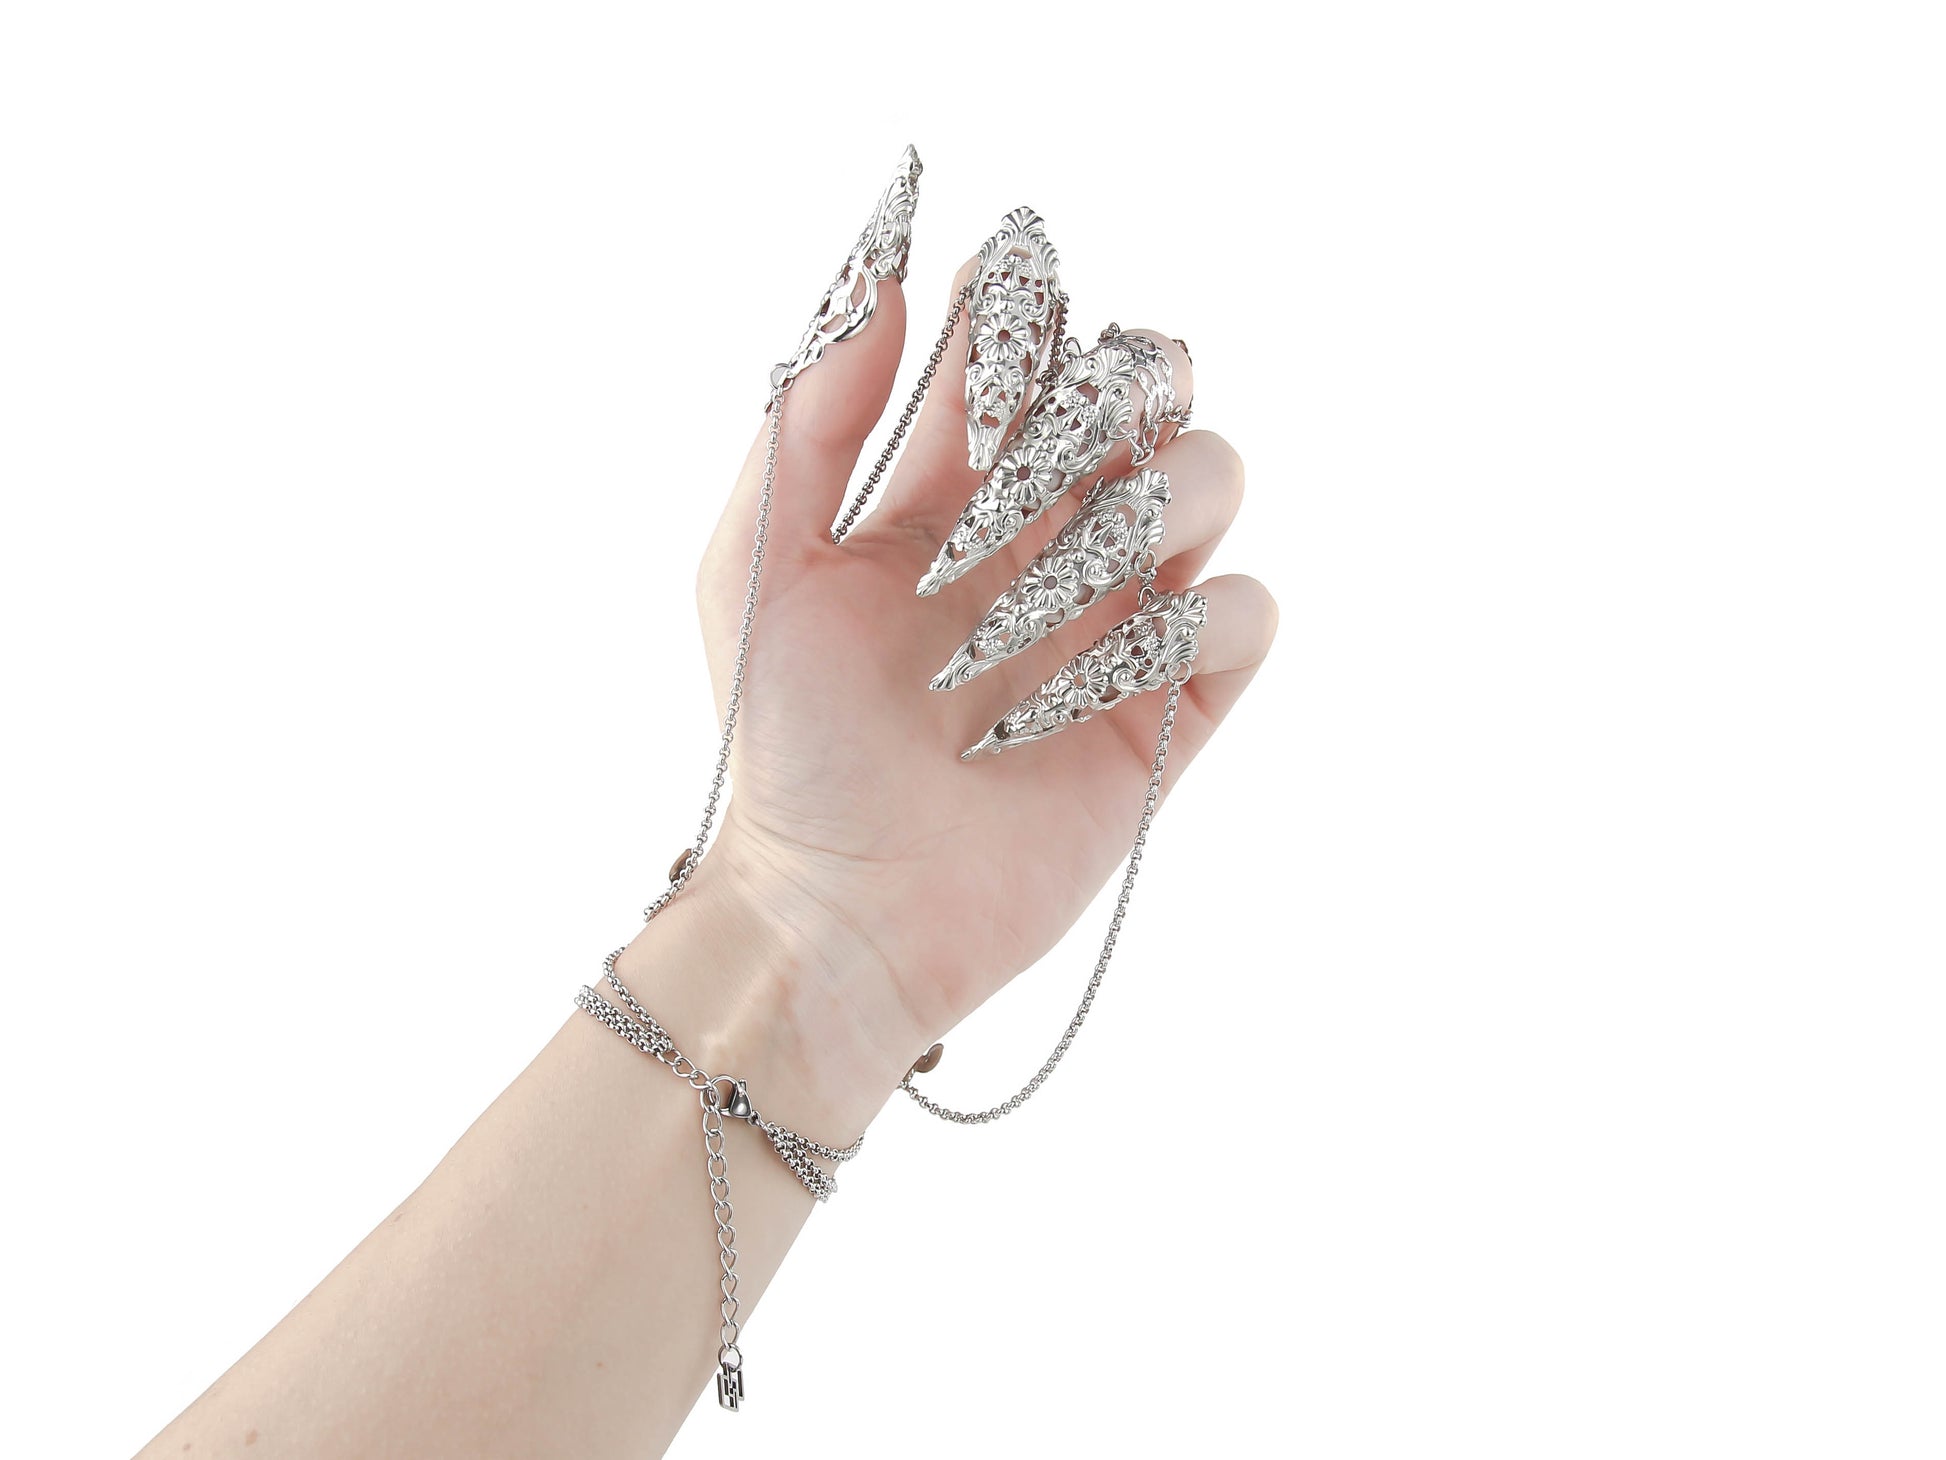 A hand adorned with a Myril Jewels chain bracelet with claws presents an image of neo-goth luxury. Perfect for gothic-chic aficionados and those seeking a unique addition to their Halloween or rave party jewelry collection, these claw rings make a bold statement.